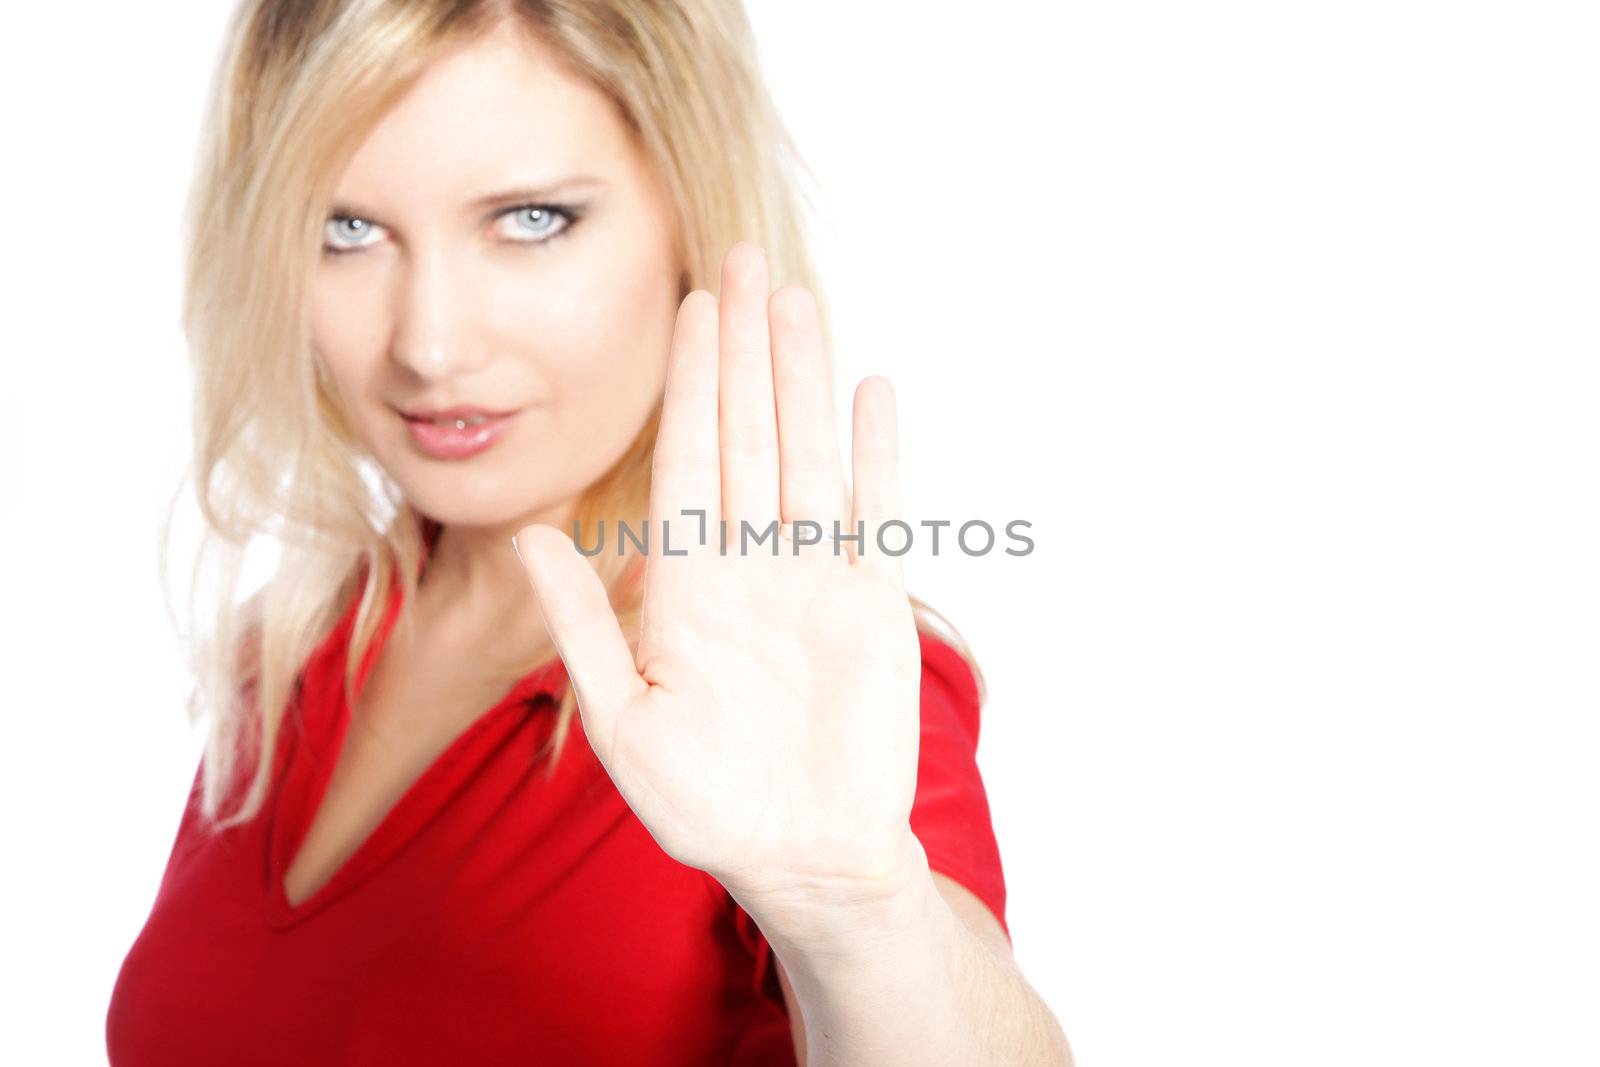 Woman making a cease and desist gesture by Farina6000